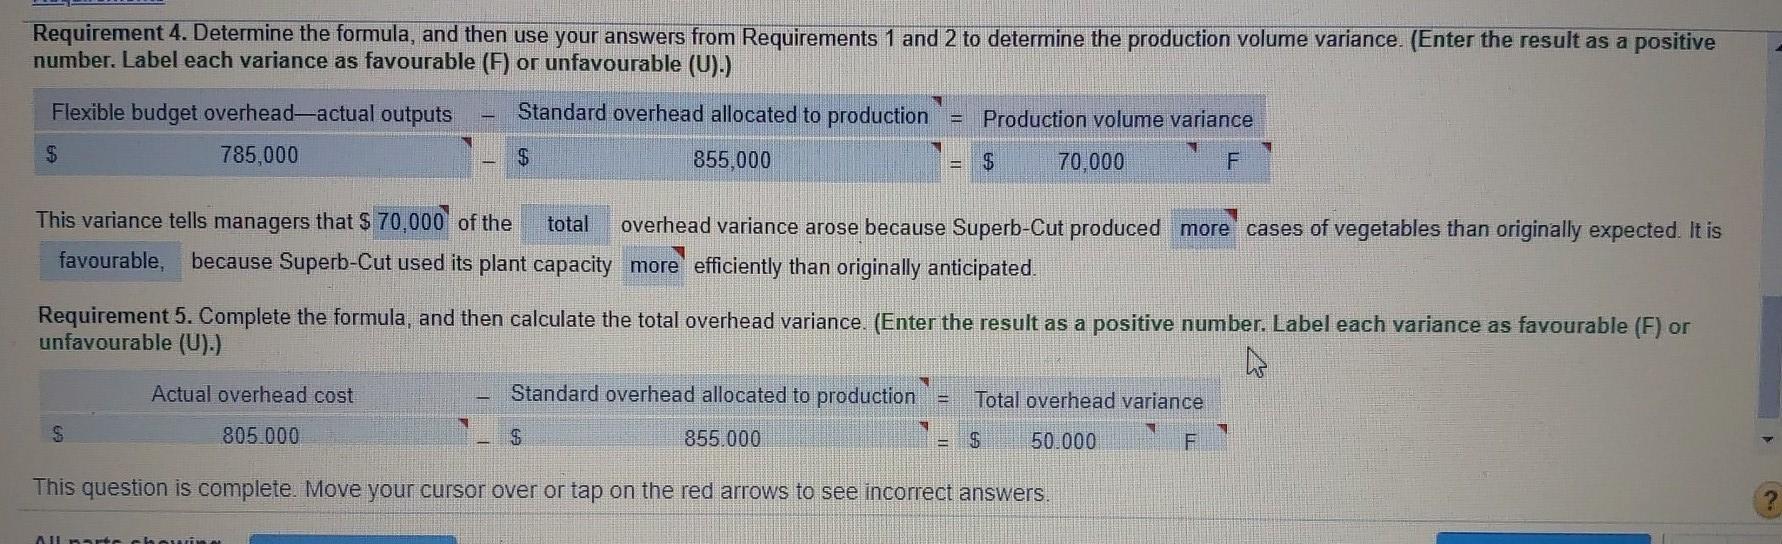 Requirement 4. Determine the formula, and then use your answers from Requirements 1 and 2 to determine the production volume